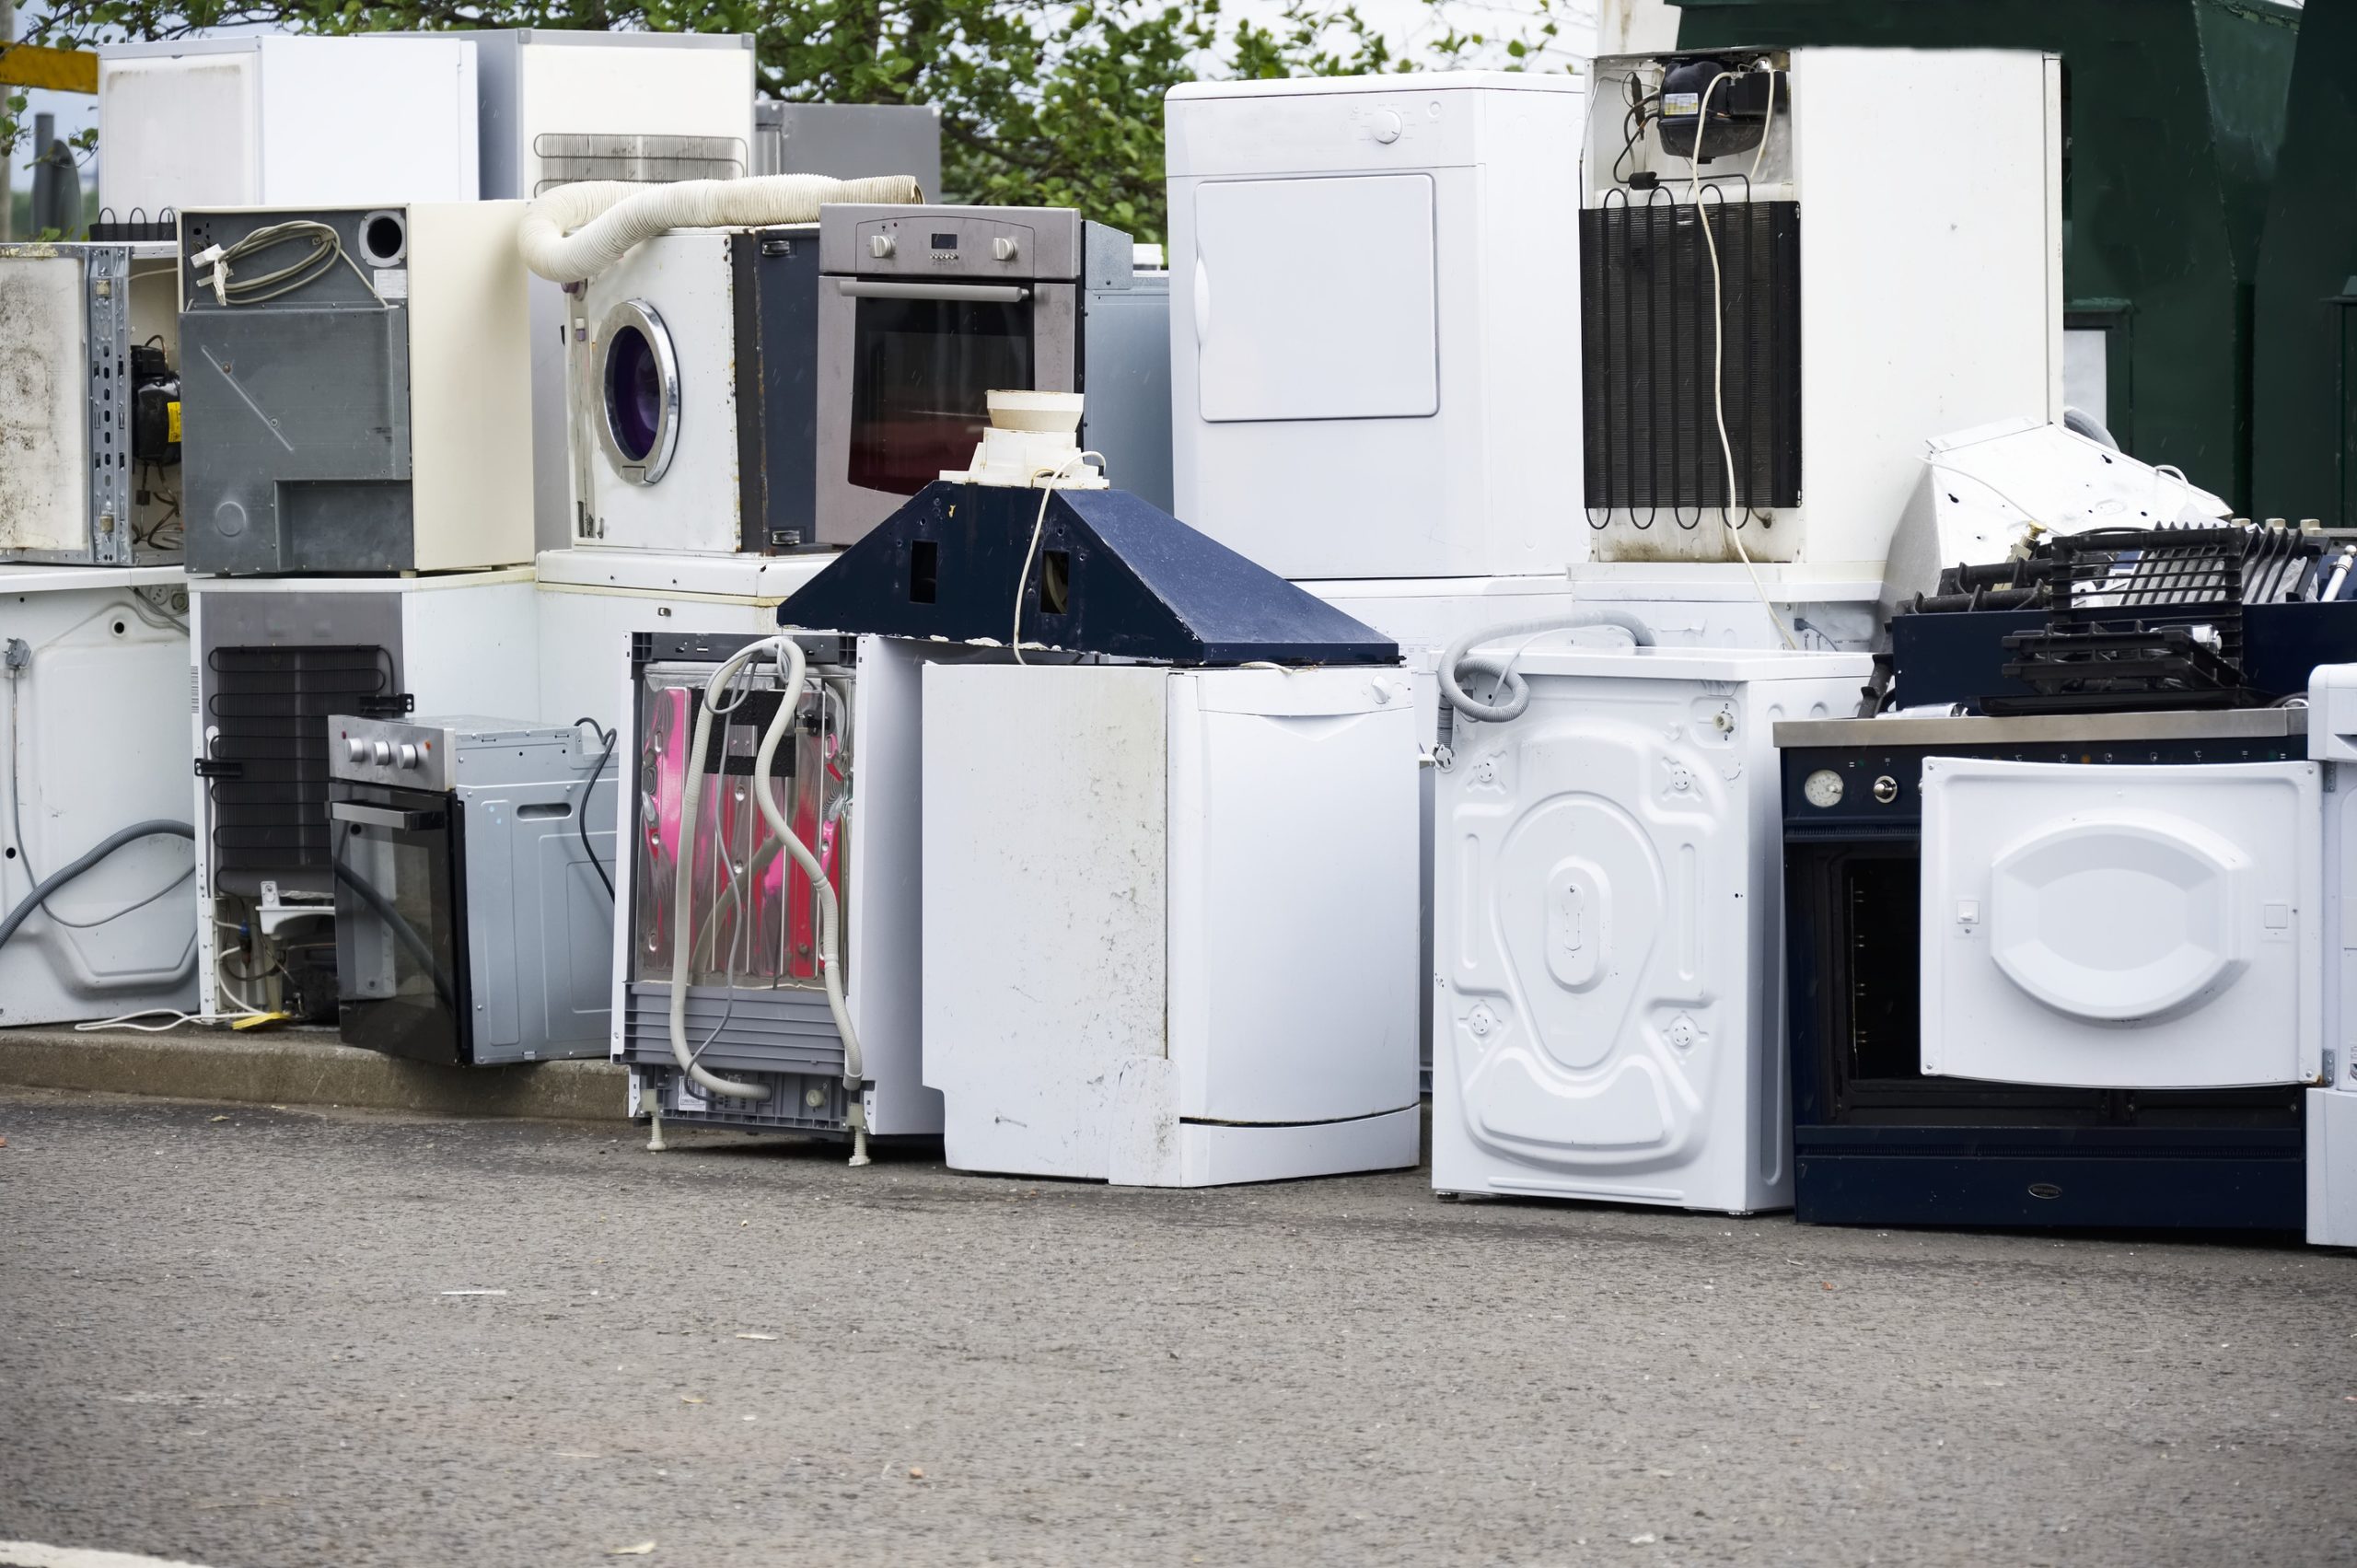 Who Will Pick Up Old Appliances for Free?